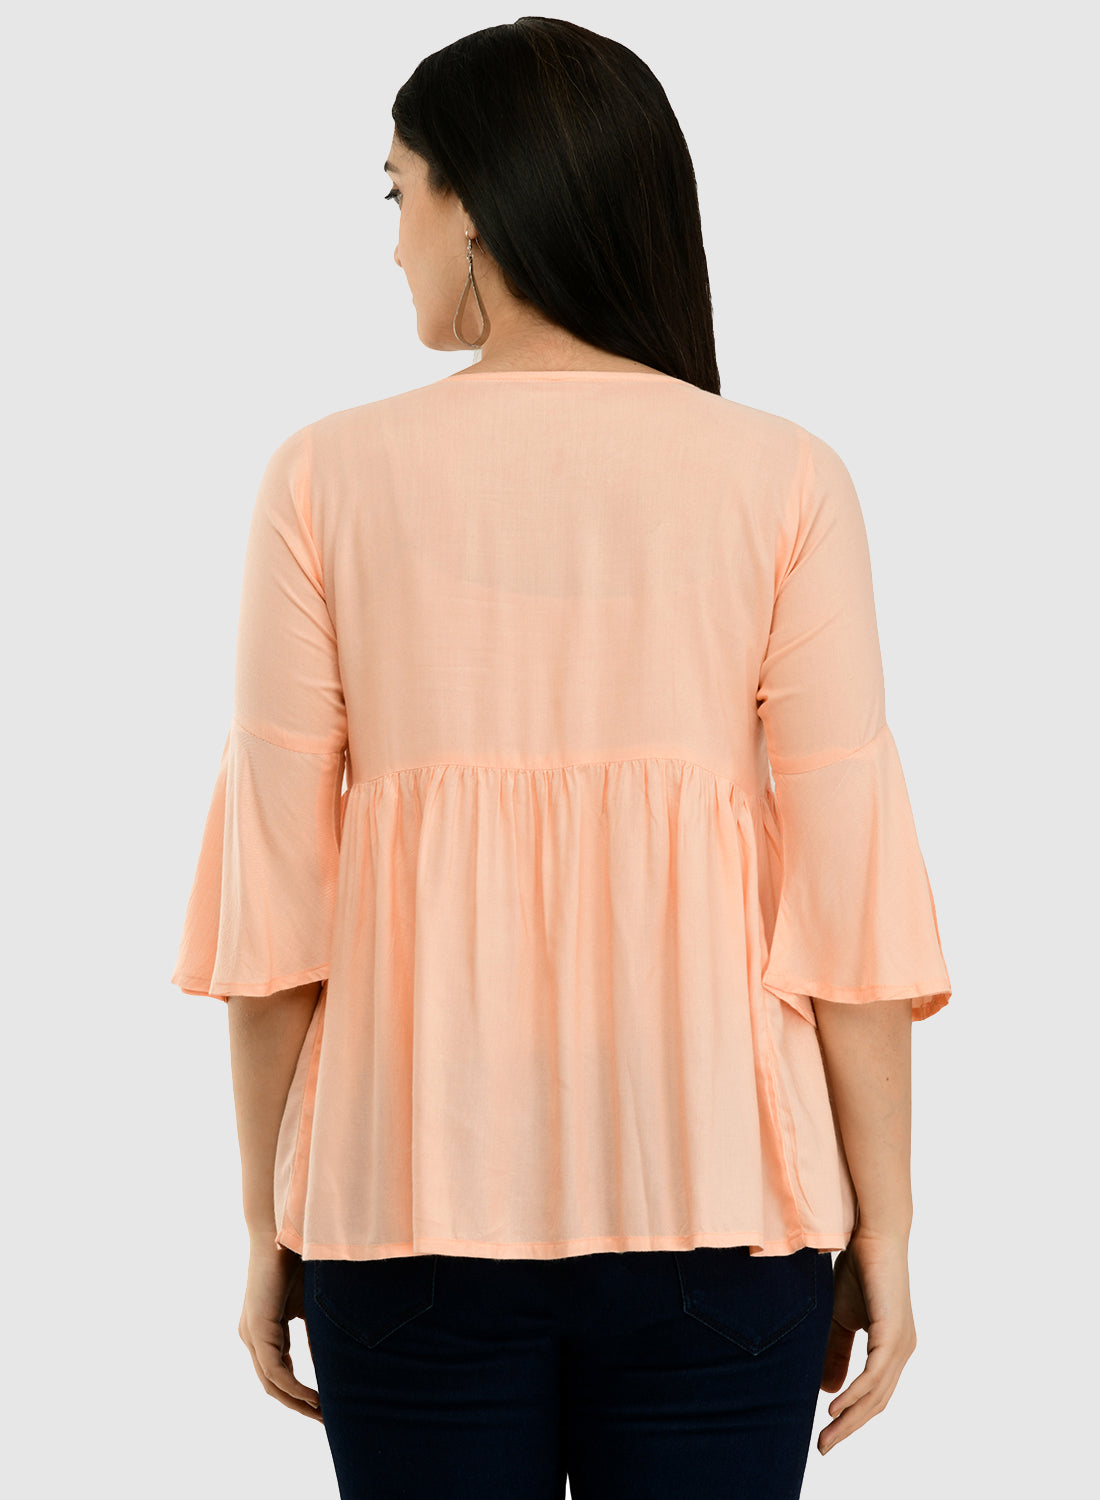 Women Peach Top Casual Bell Sleeves Floral Print